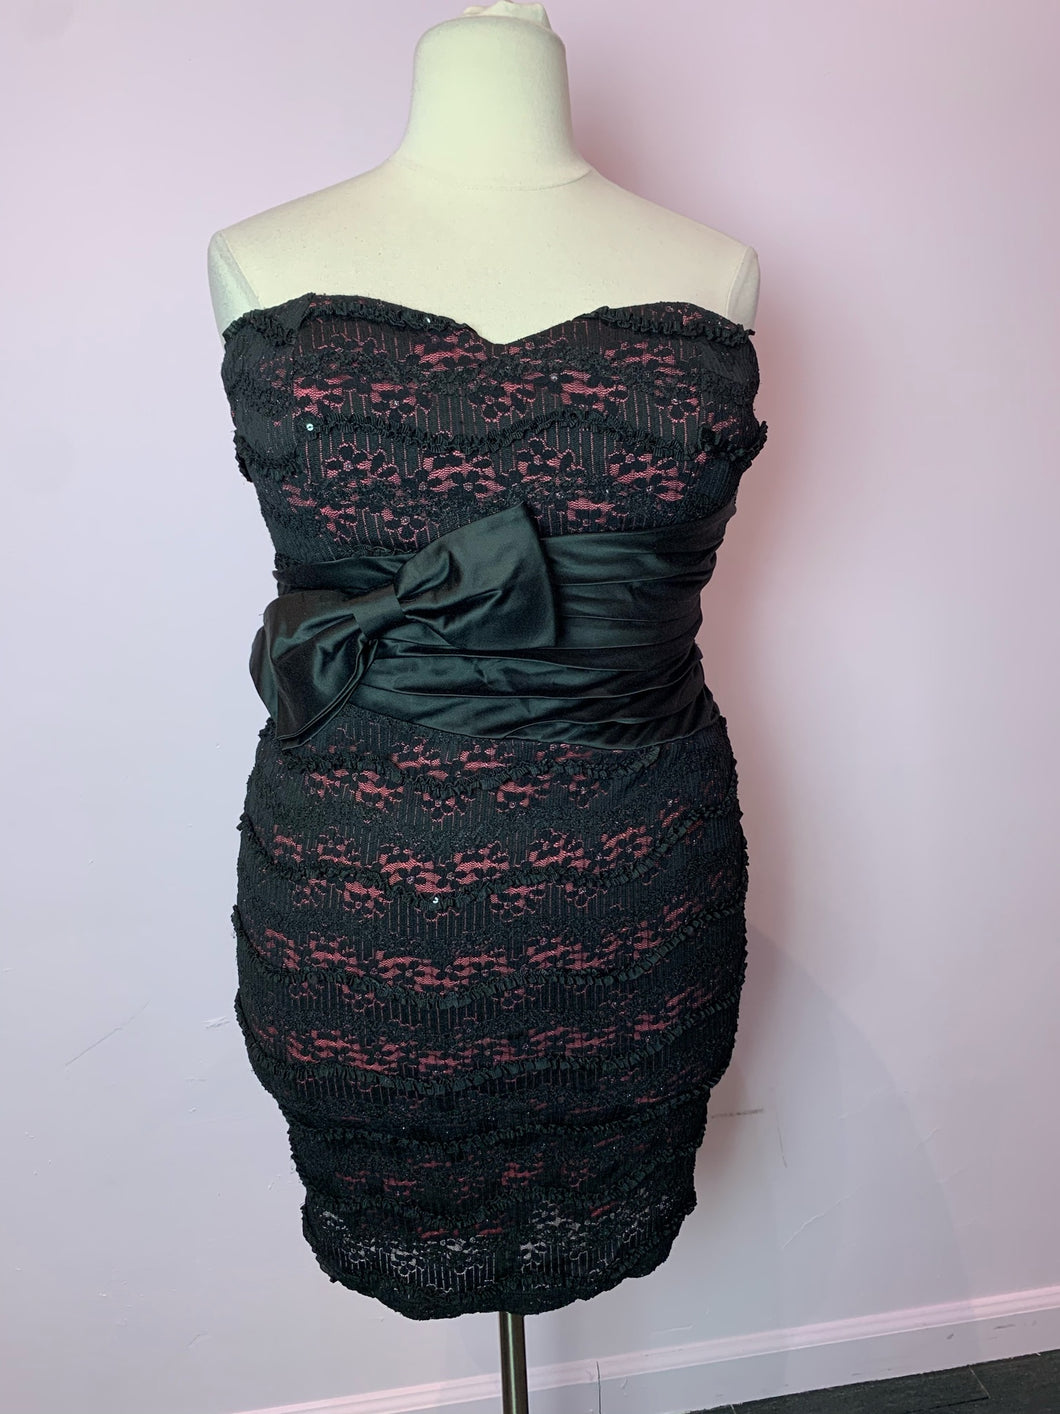 Forever 21 Pink Strapless Dress with Black Lace Overlay and Bow, Size 14